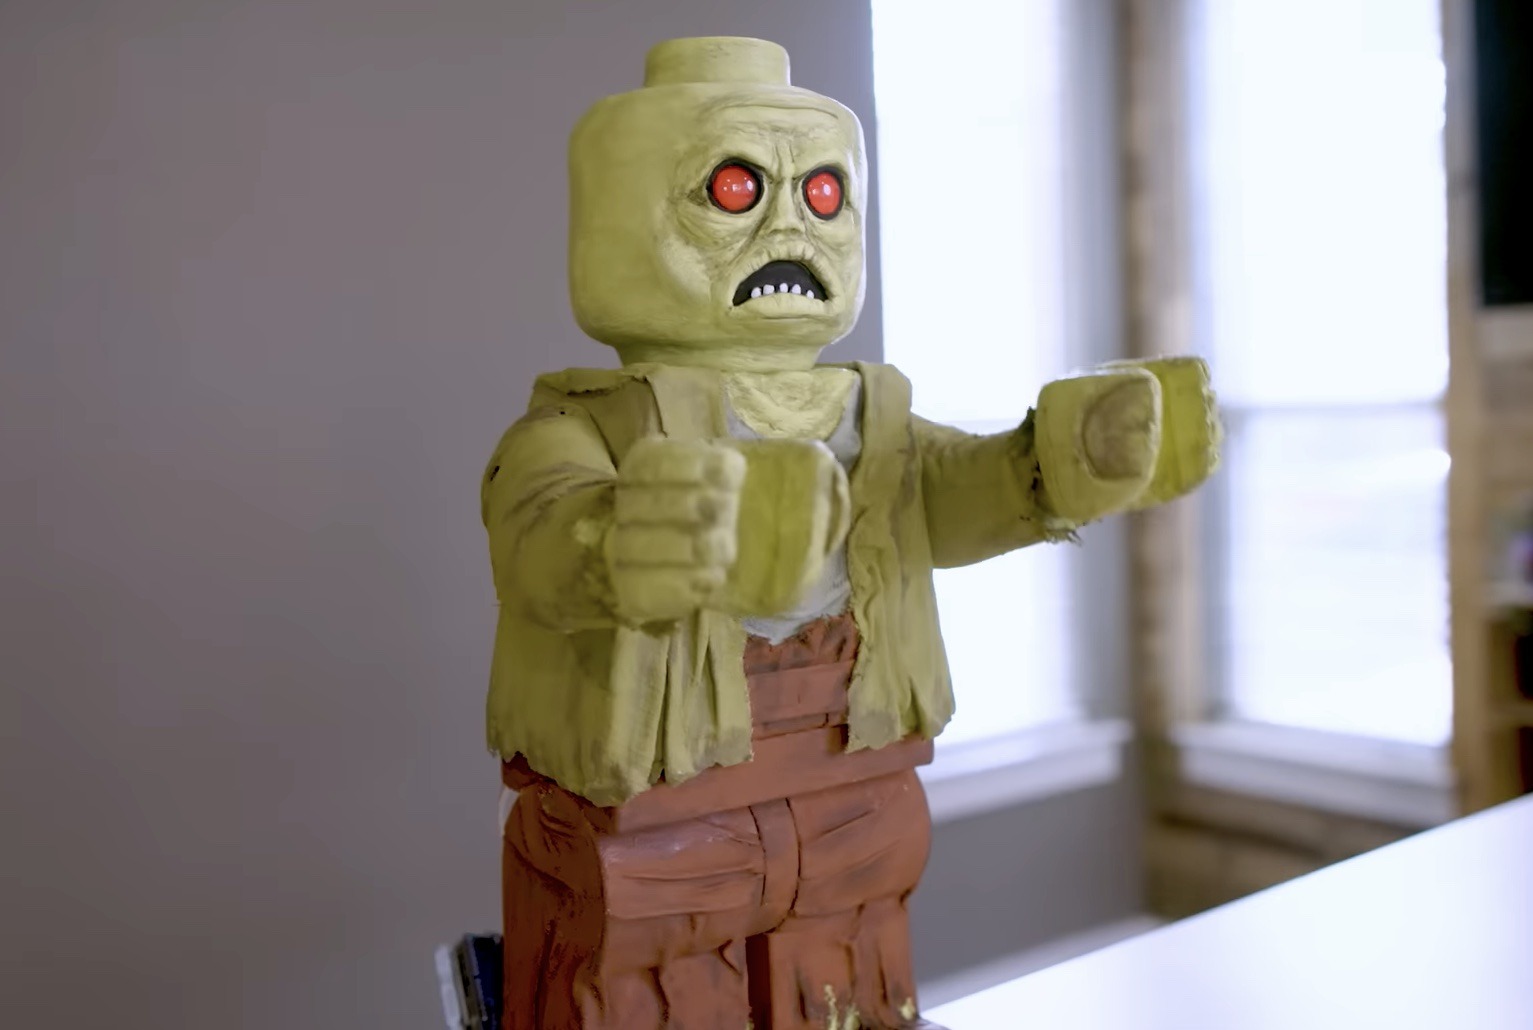 This giant animatronic LEGO minifig zombie is a delight 